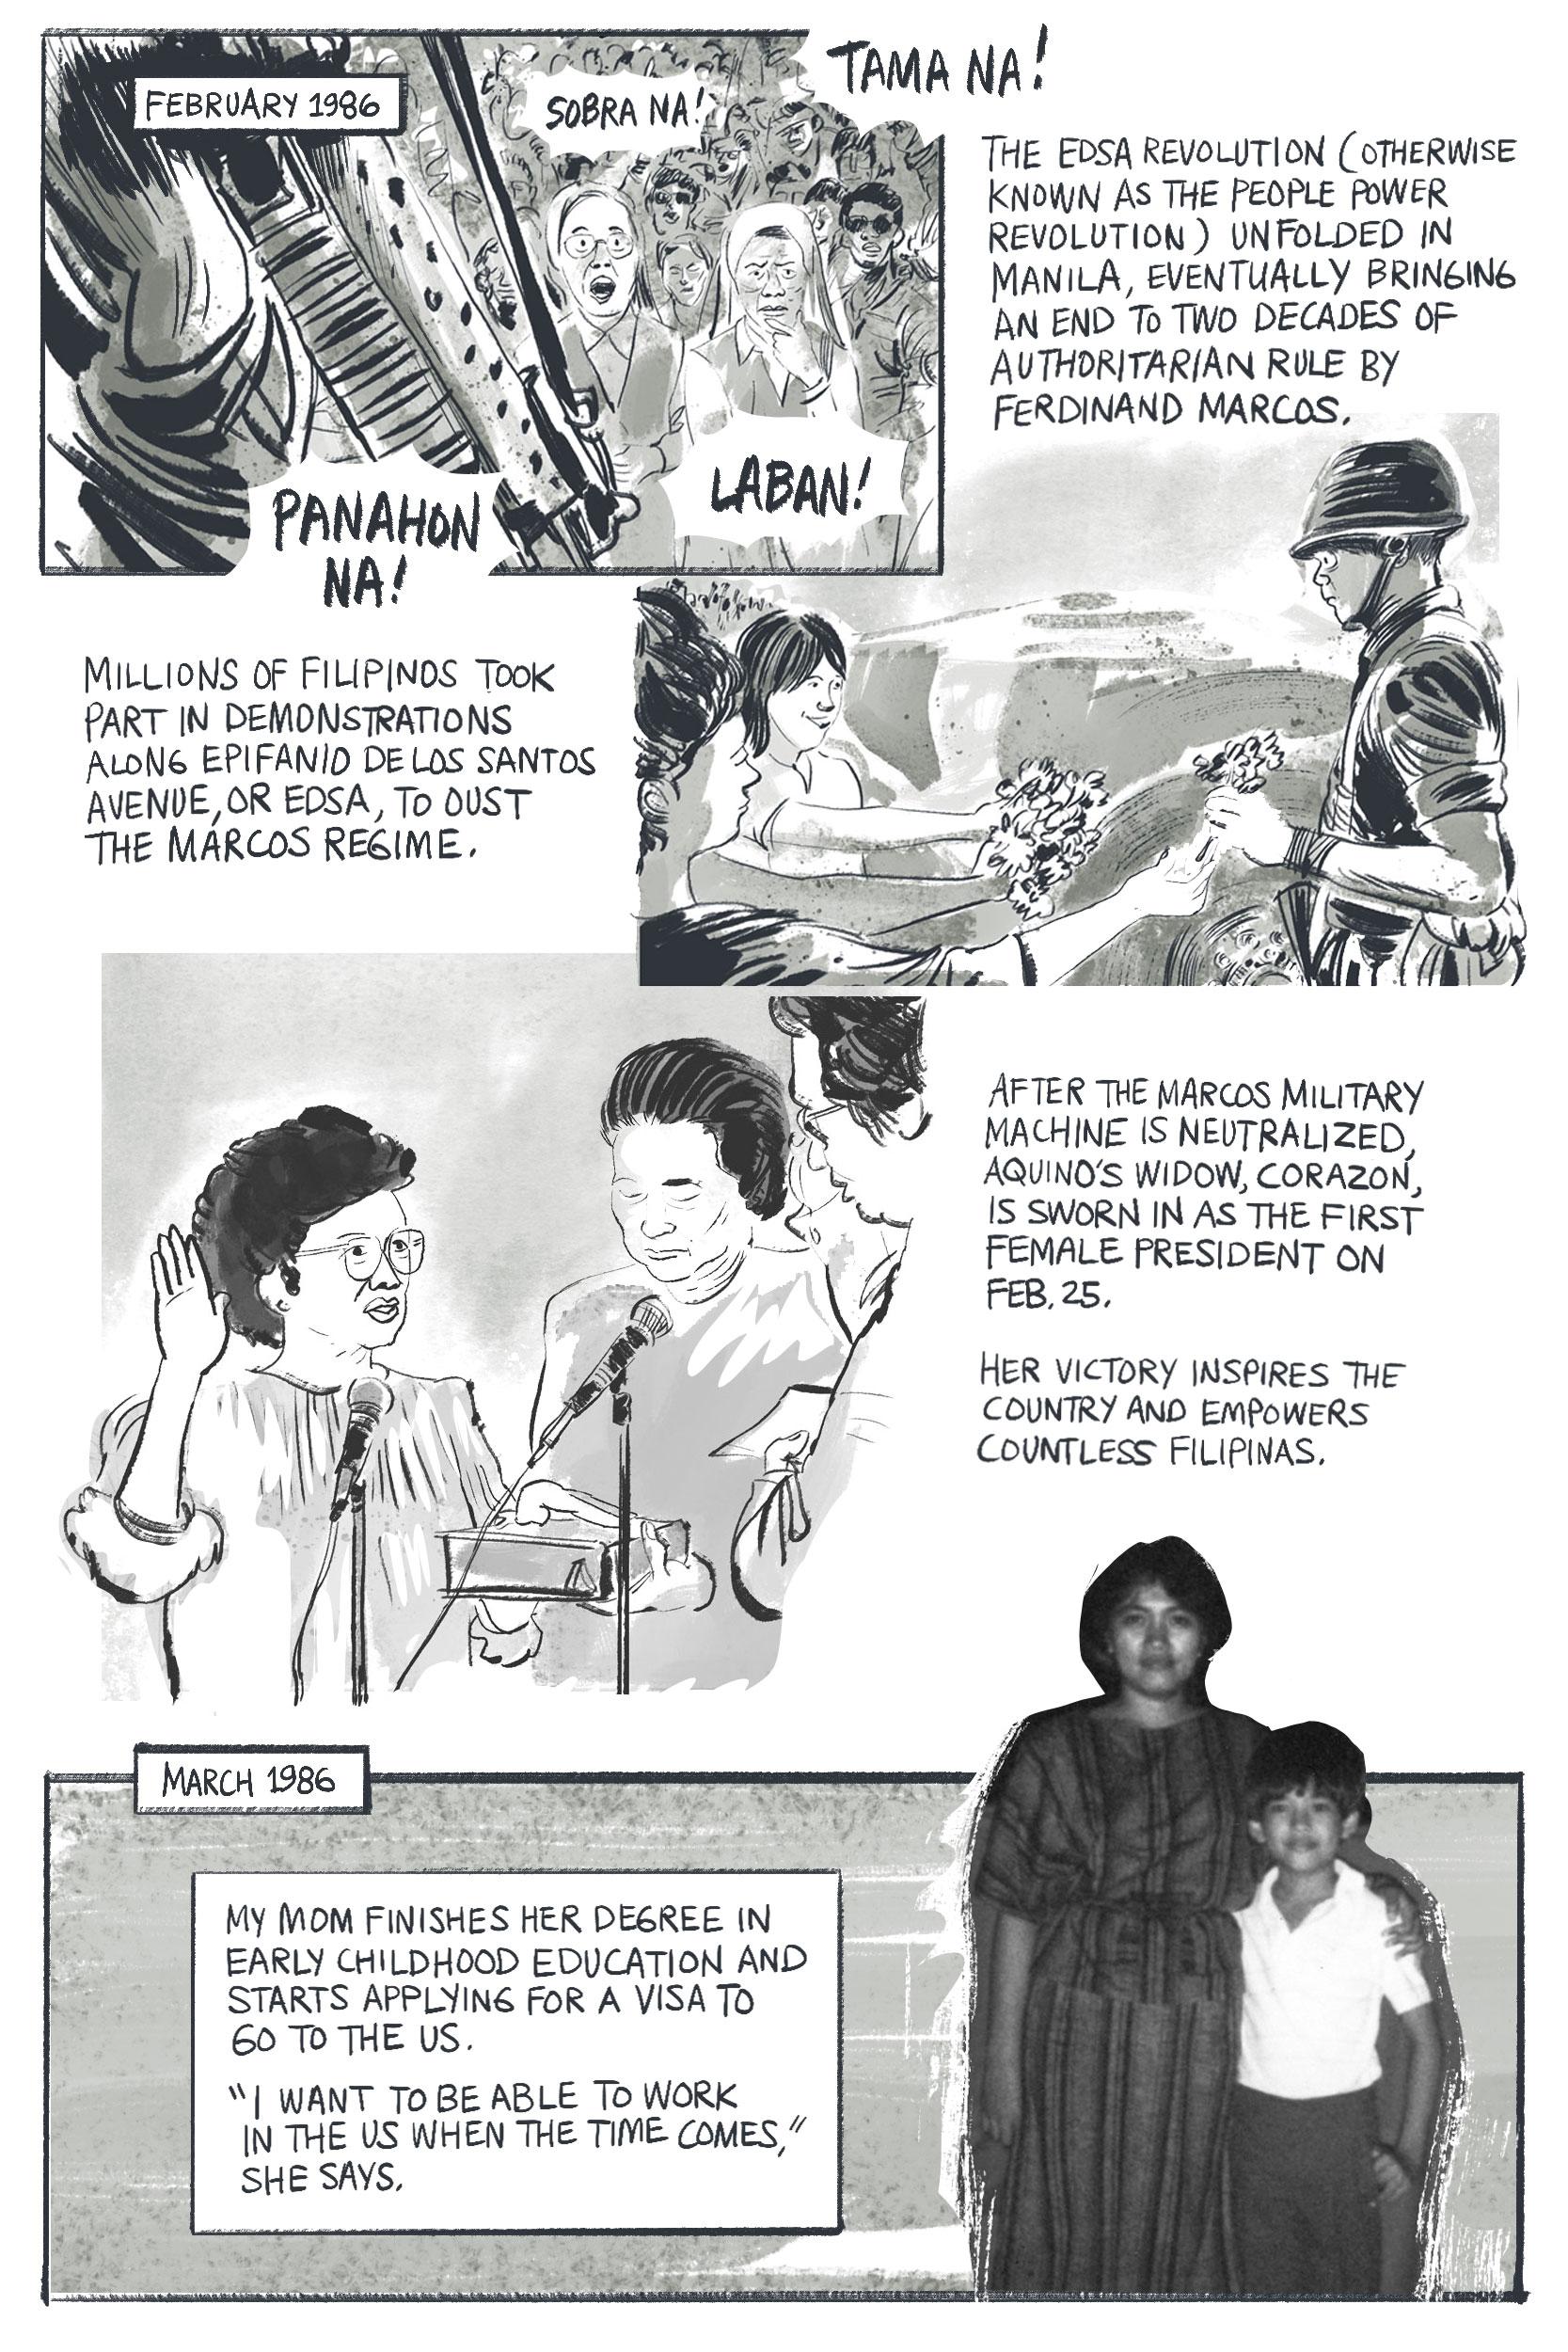 Comic panel: Scenes of political demonstrations in the Philippines; Aquino's widow, Corazon, is sworn in. Bottom: Dan's mother finishes her degree in early childhood education. At right, a photo of Dan and his mother, in 1986.